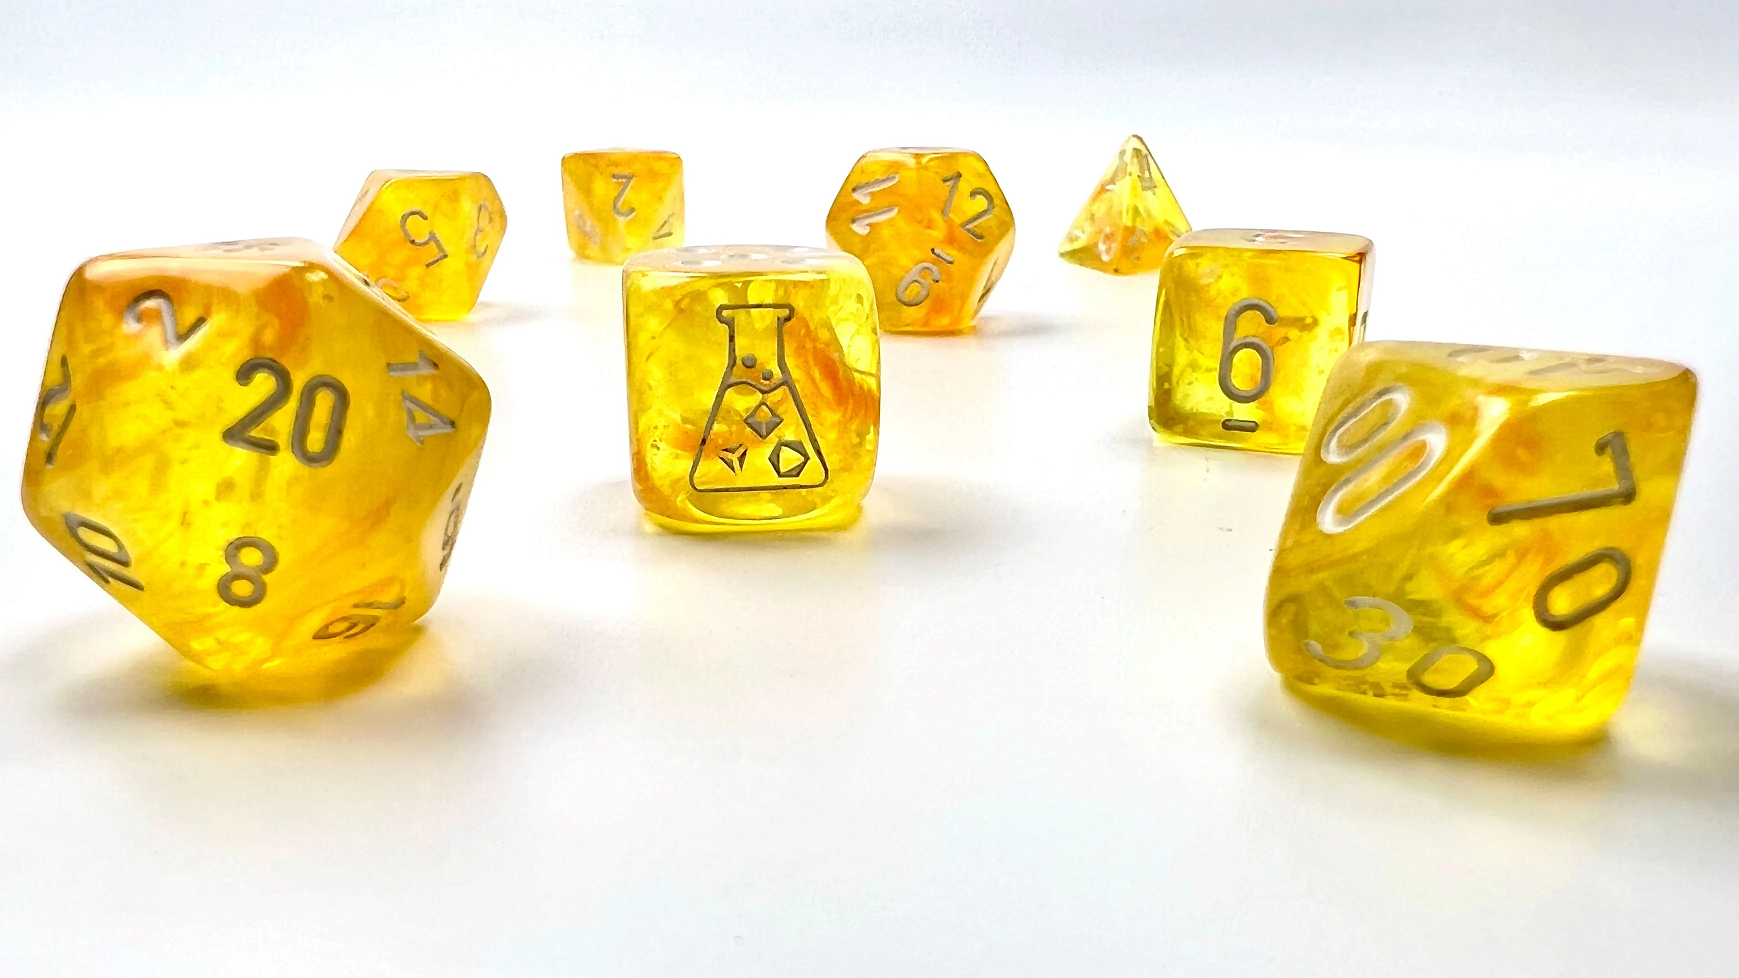 Chessex Lab Dice Borealis Canary/White Luminary Polyhedral 7-Die Set